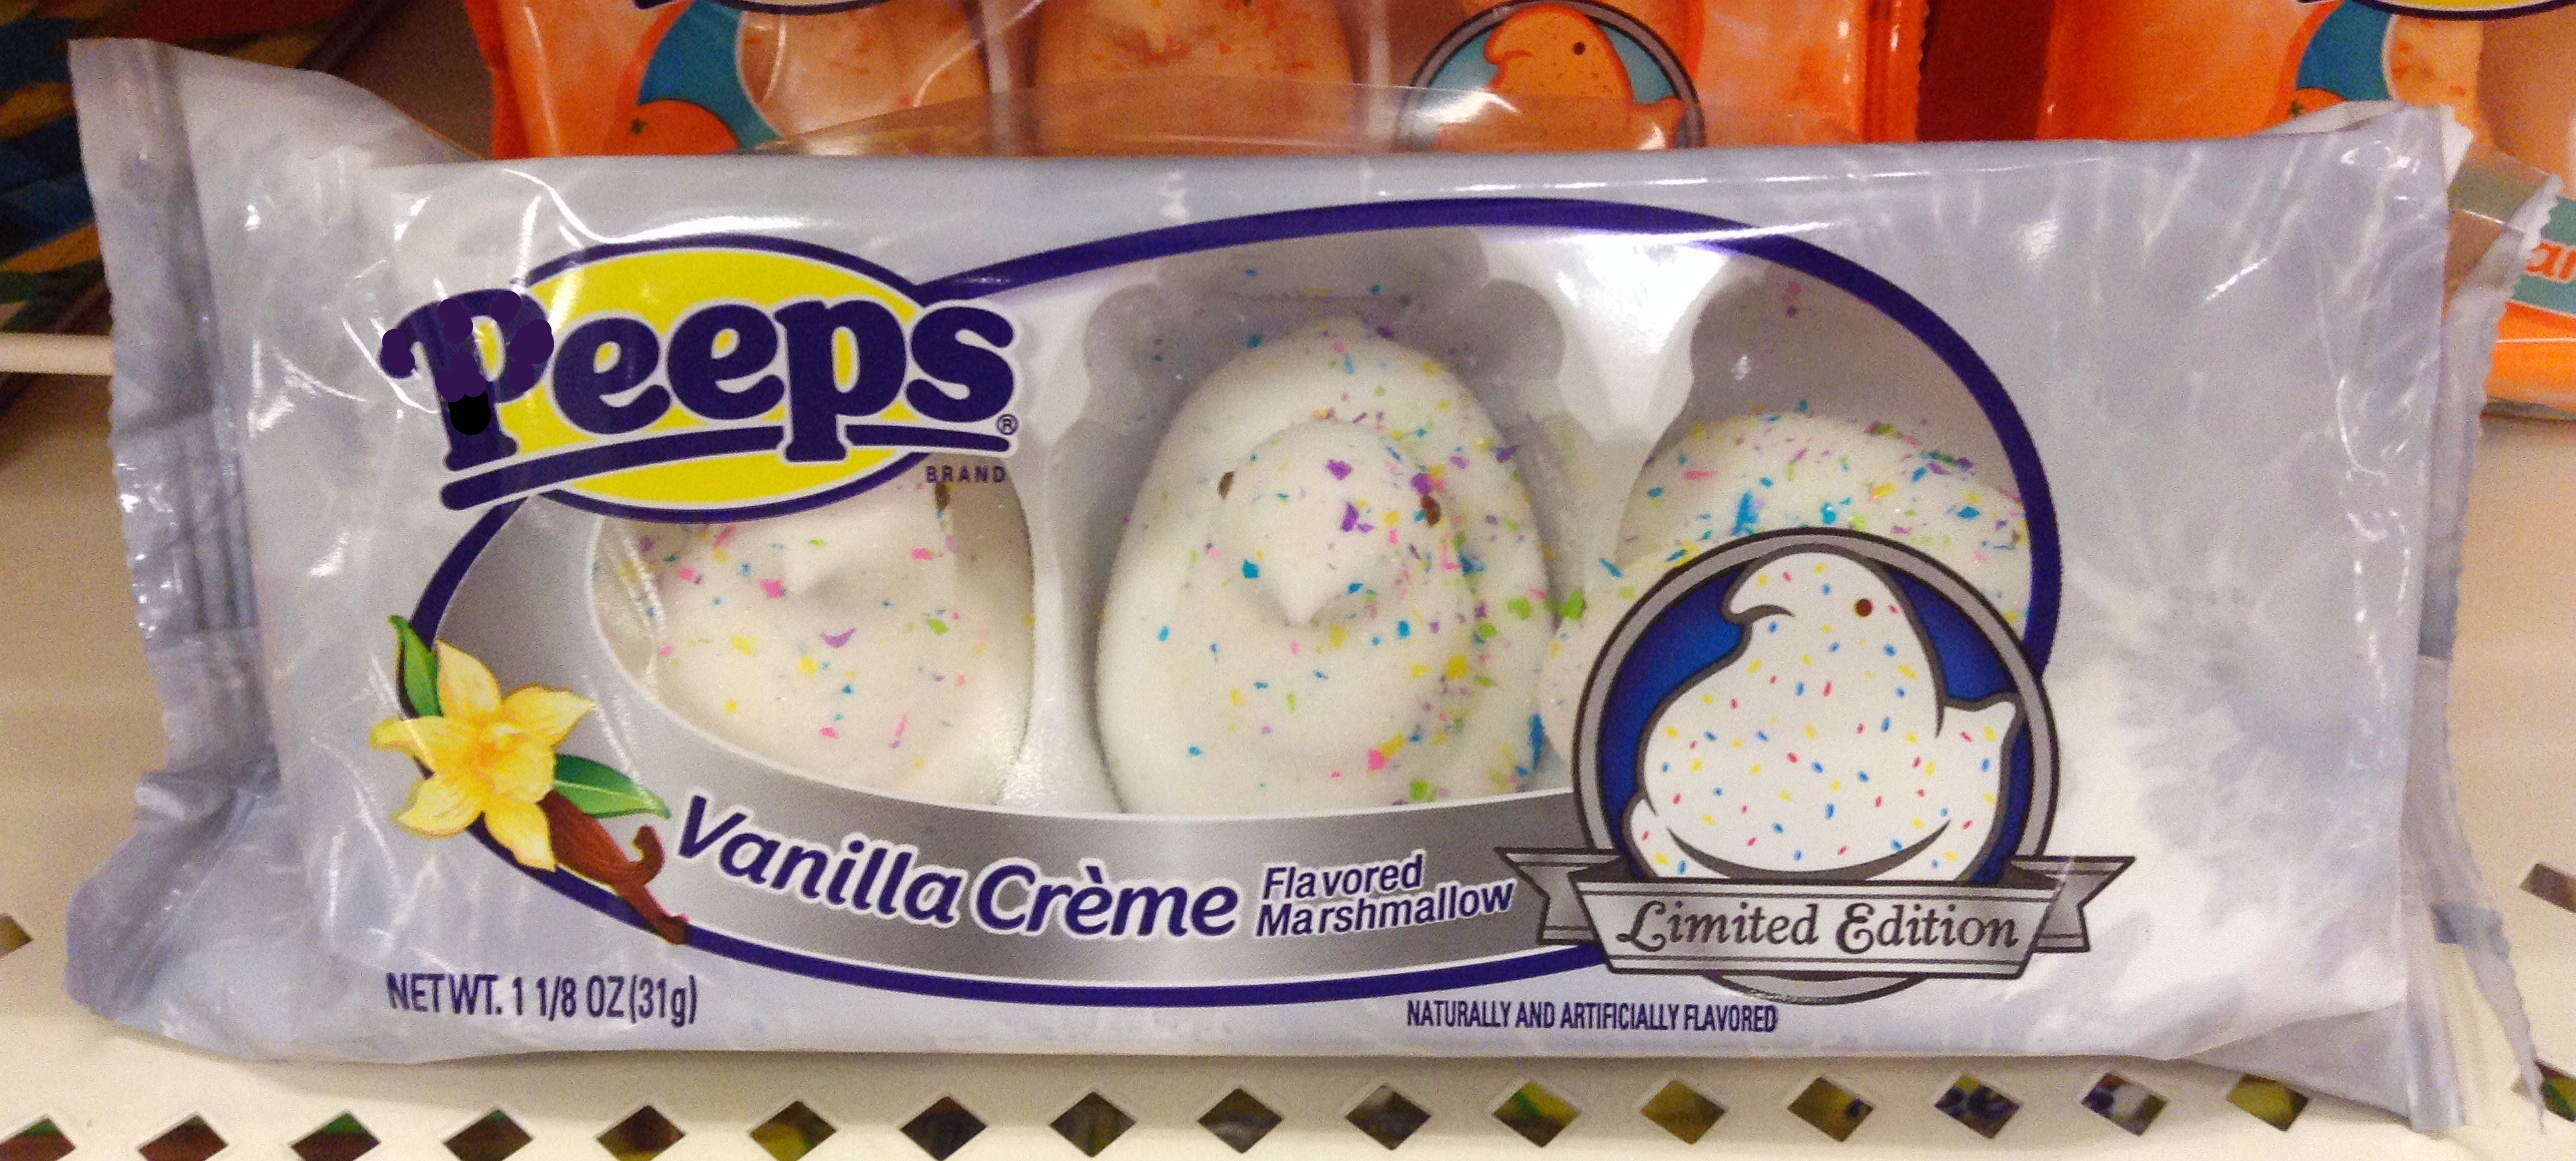 several pees cookies packaged in a bag on a shelf